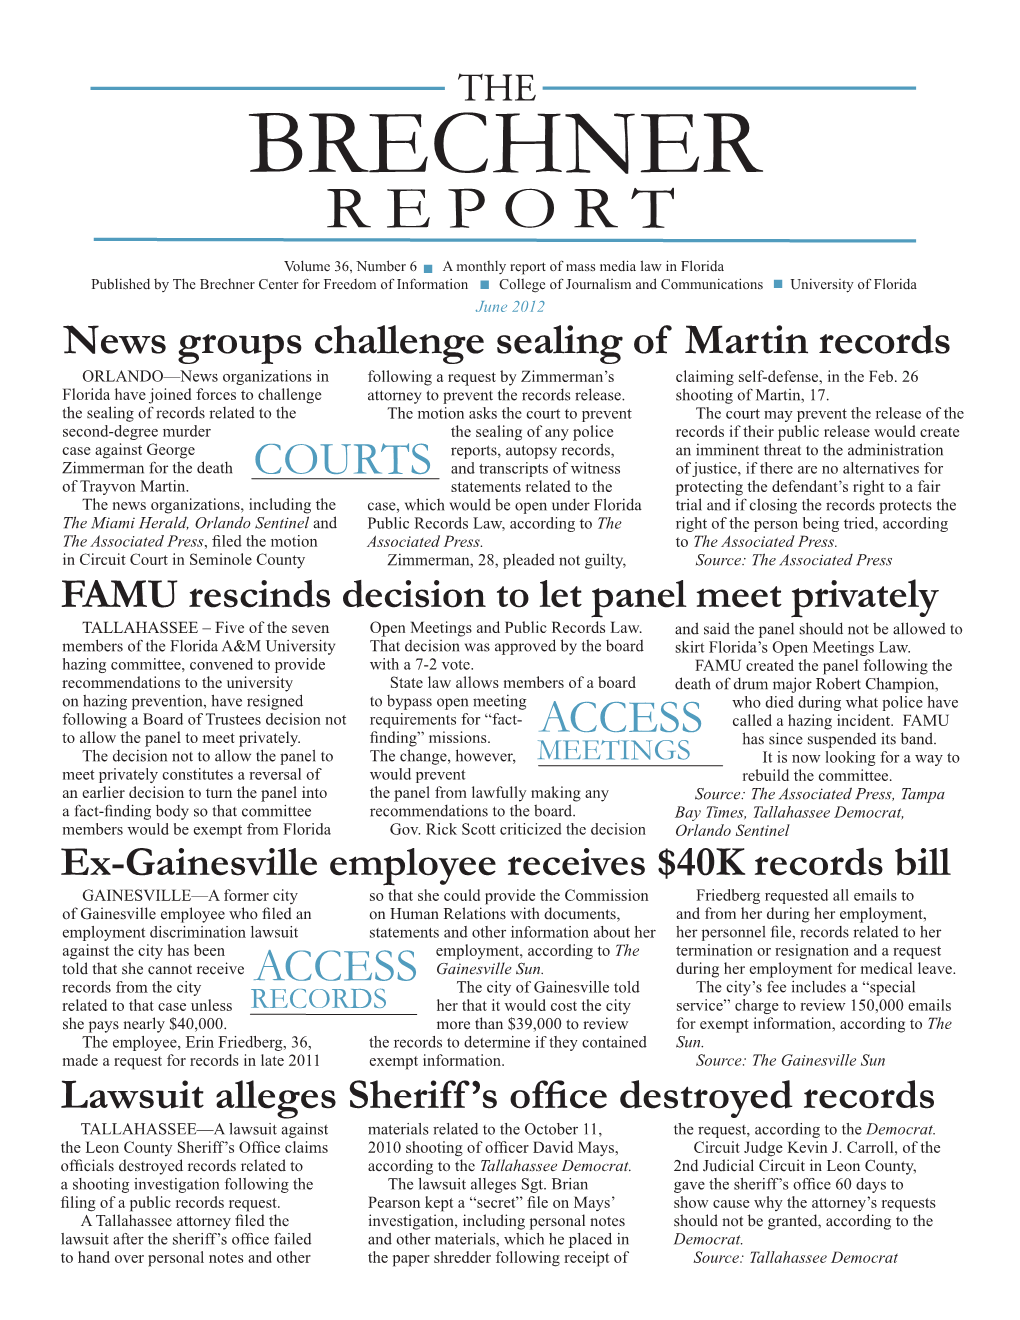 June 2012 News Groups Challenge Sealing of Martin Records ORLANDO—News Organizations in Following a Request by Zimmerman’S Claiming Self-Defense, in the Feb